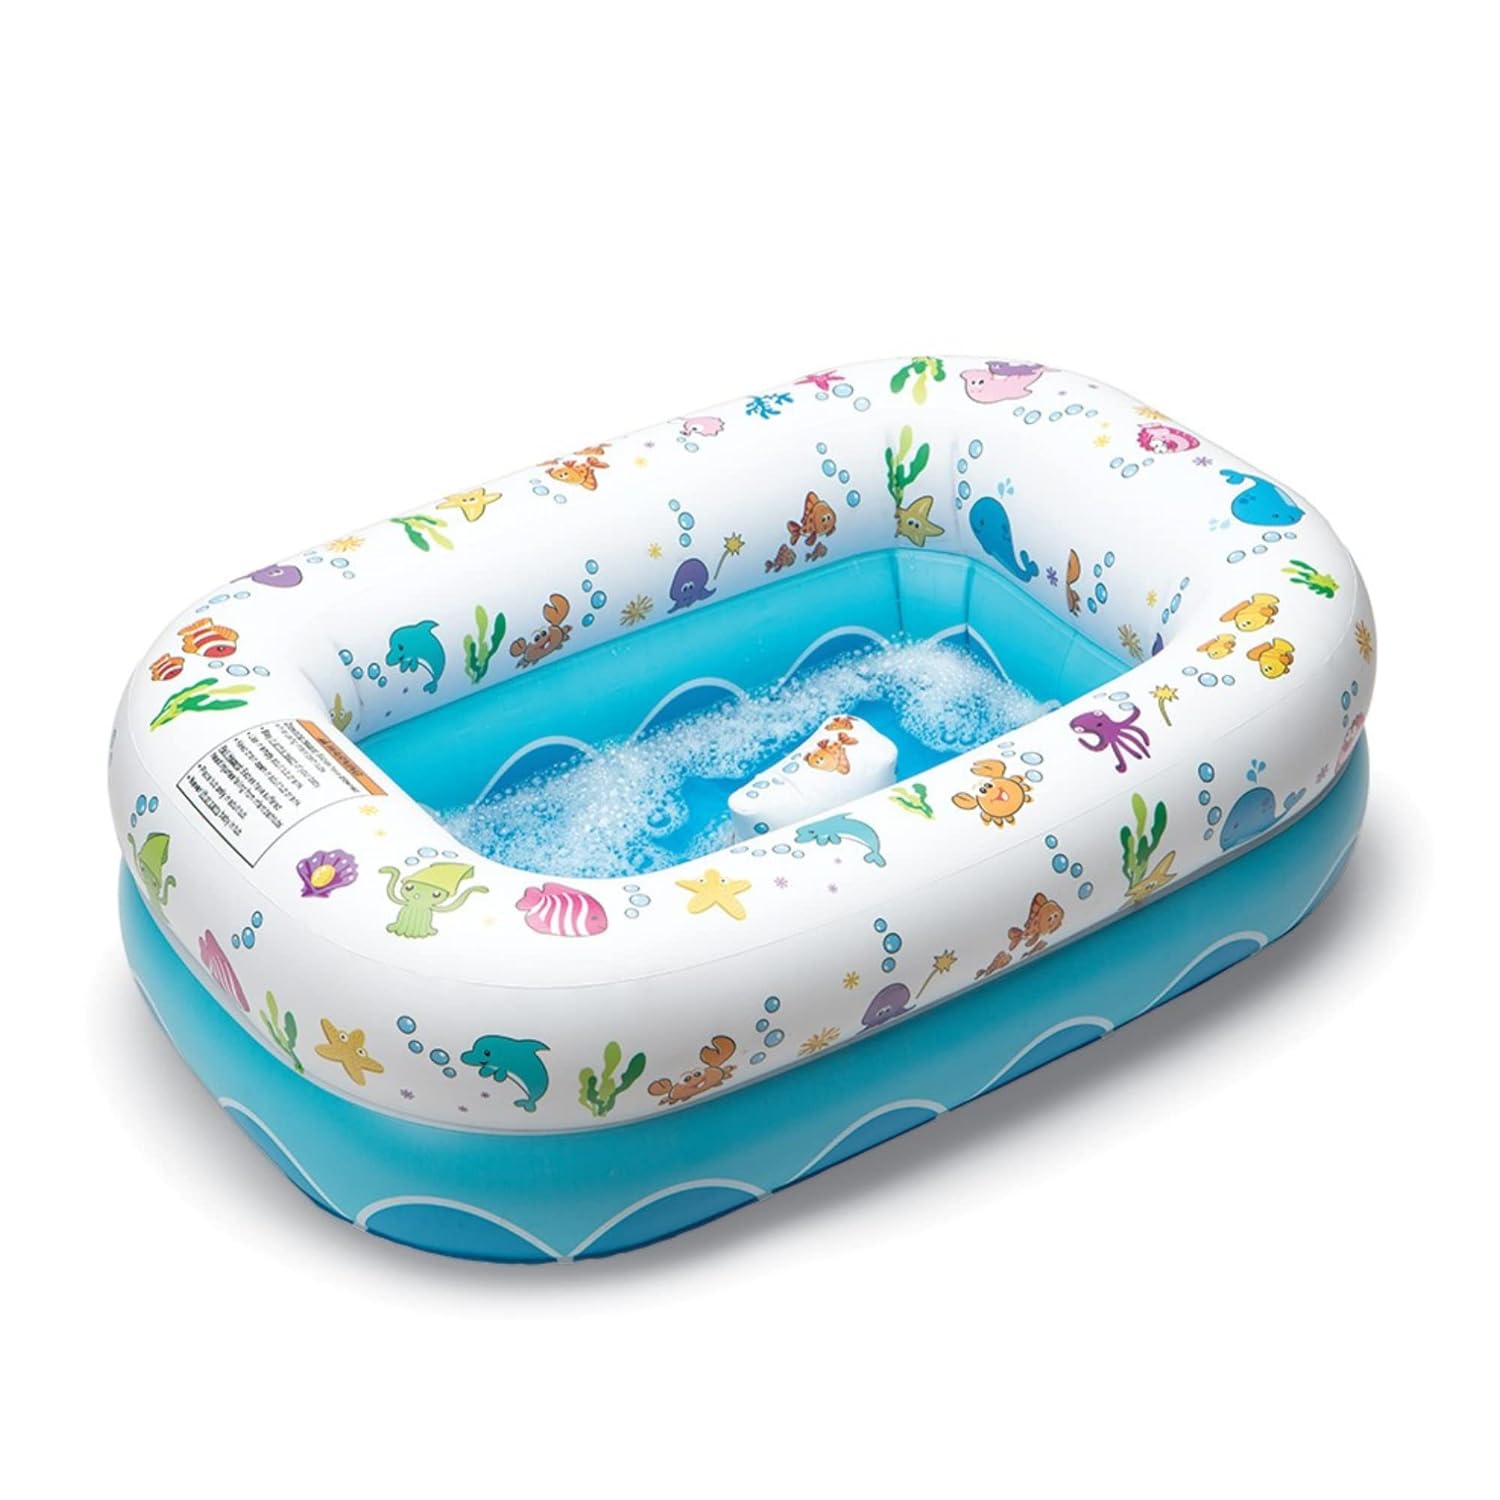 Wonderful! Ready within minutes and can be put away just as fast. Size is perfect fit in the tub. My daughter feels safe and comfortable. Enough room for baby and toys.